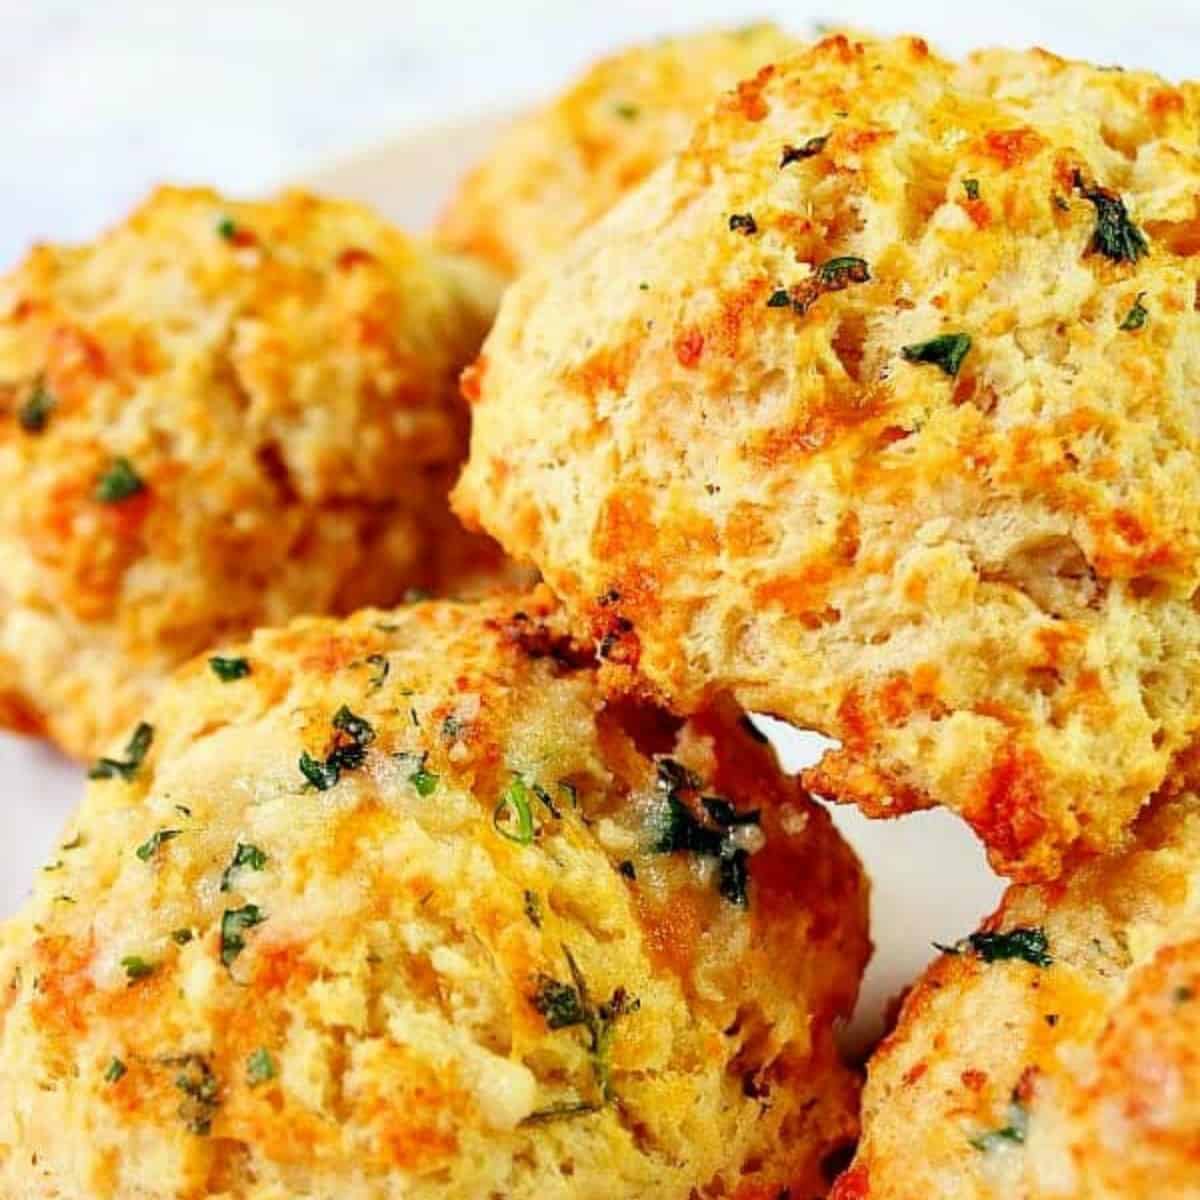 Cheddar Bay biscuits on a plate.